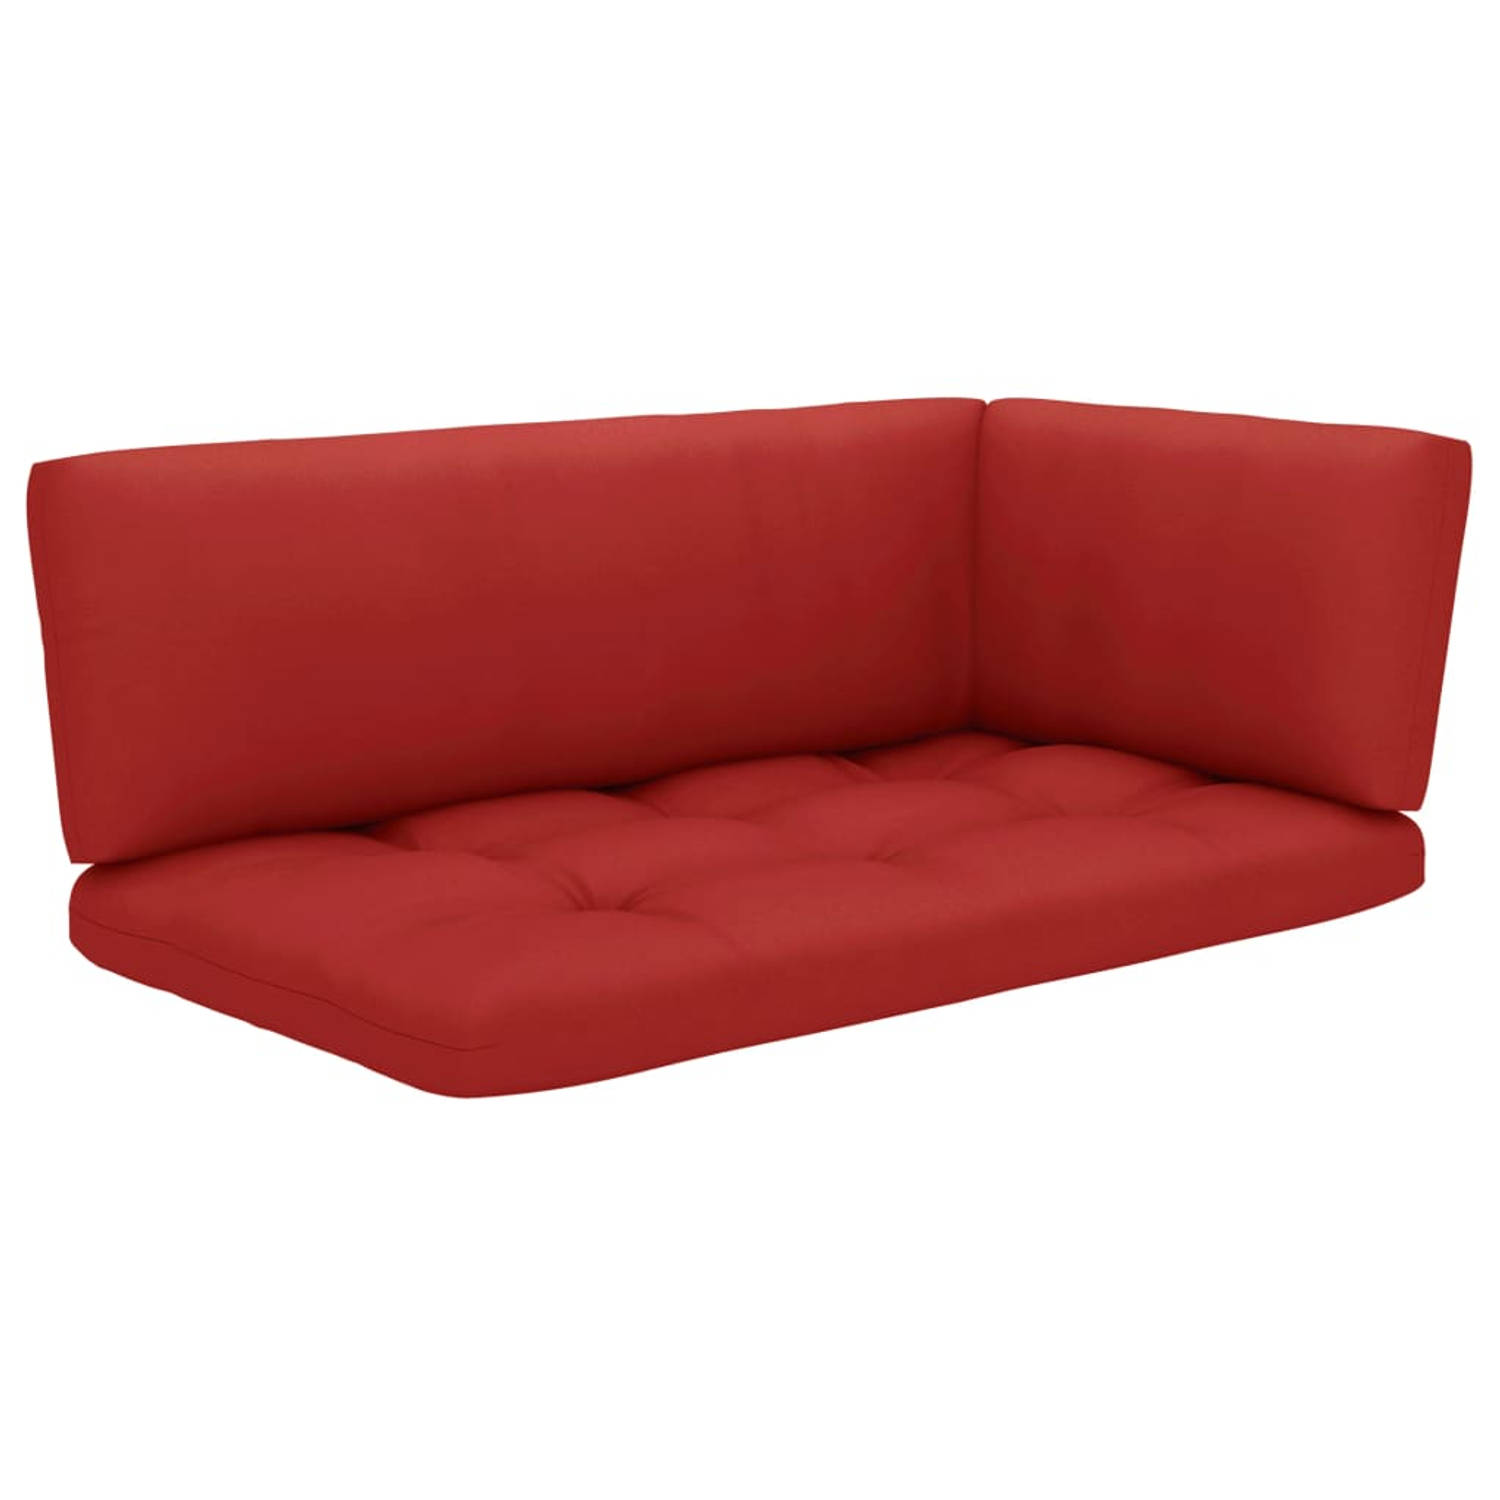 The Living Store Pallet Loungeset - Tuinmeubelset - Grenenhout - 60 x 60 x 25 cm - Rood kussen